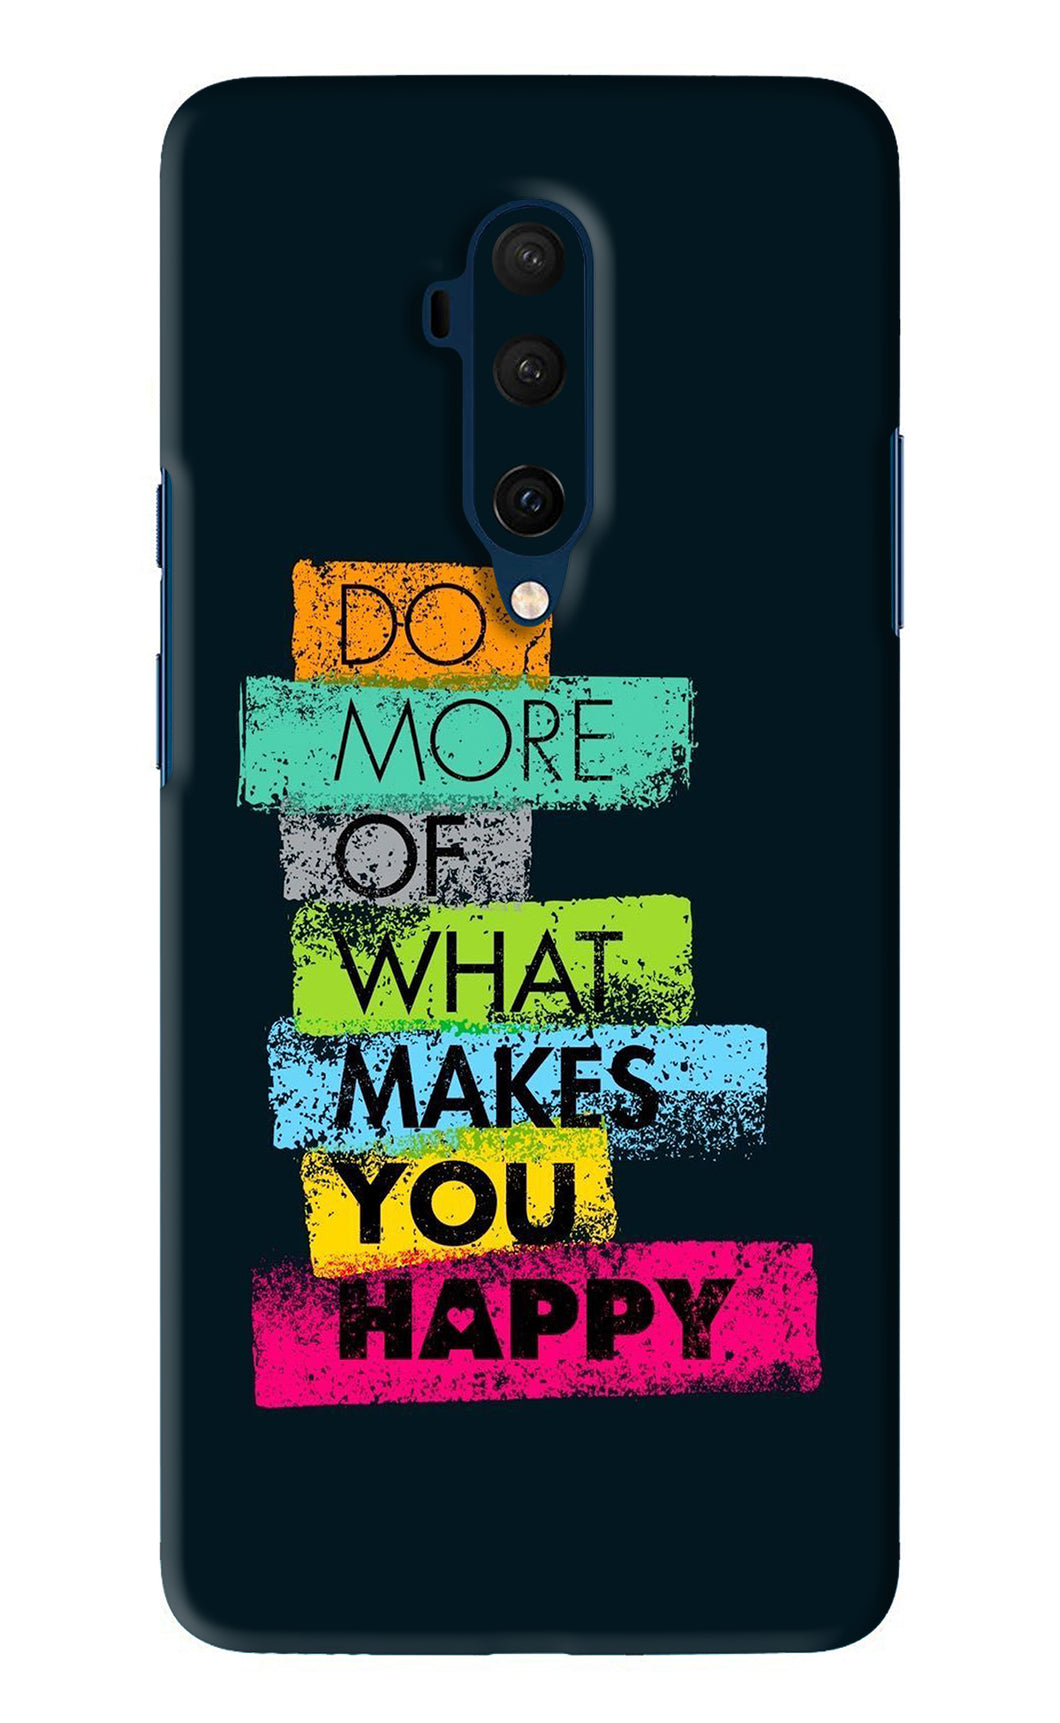 Do More Of What Makes You Happy OnePlus 7T Pro Back Skin Wrap